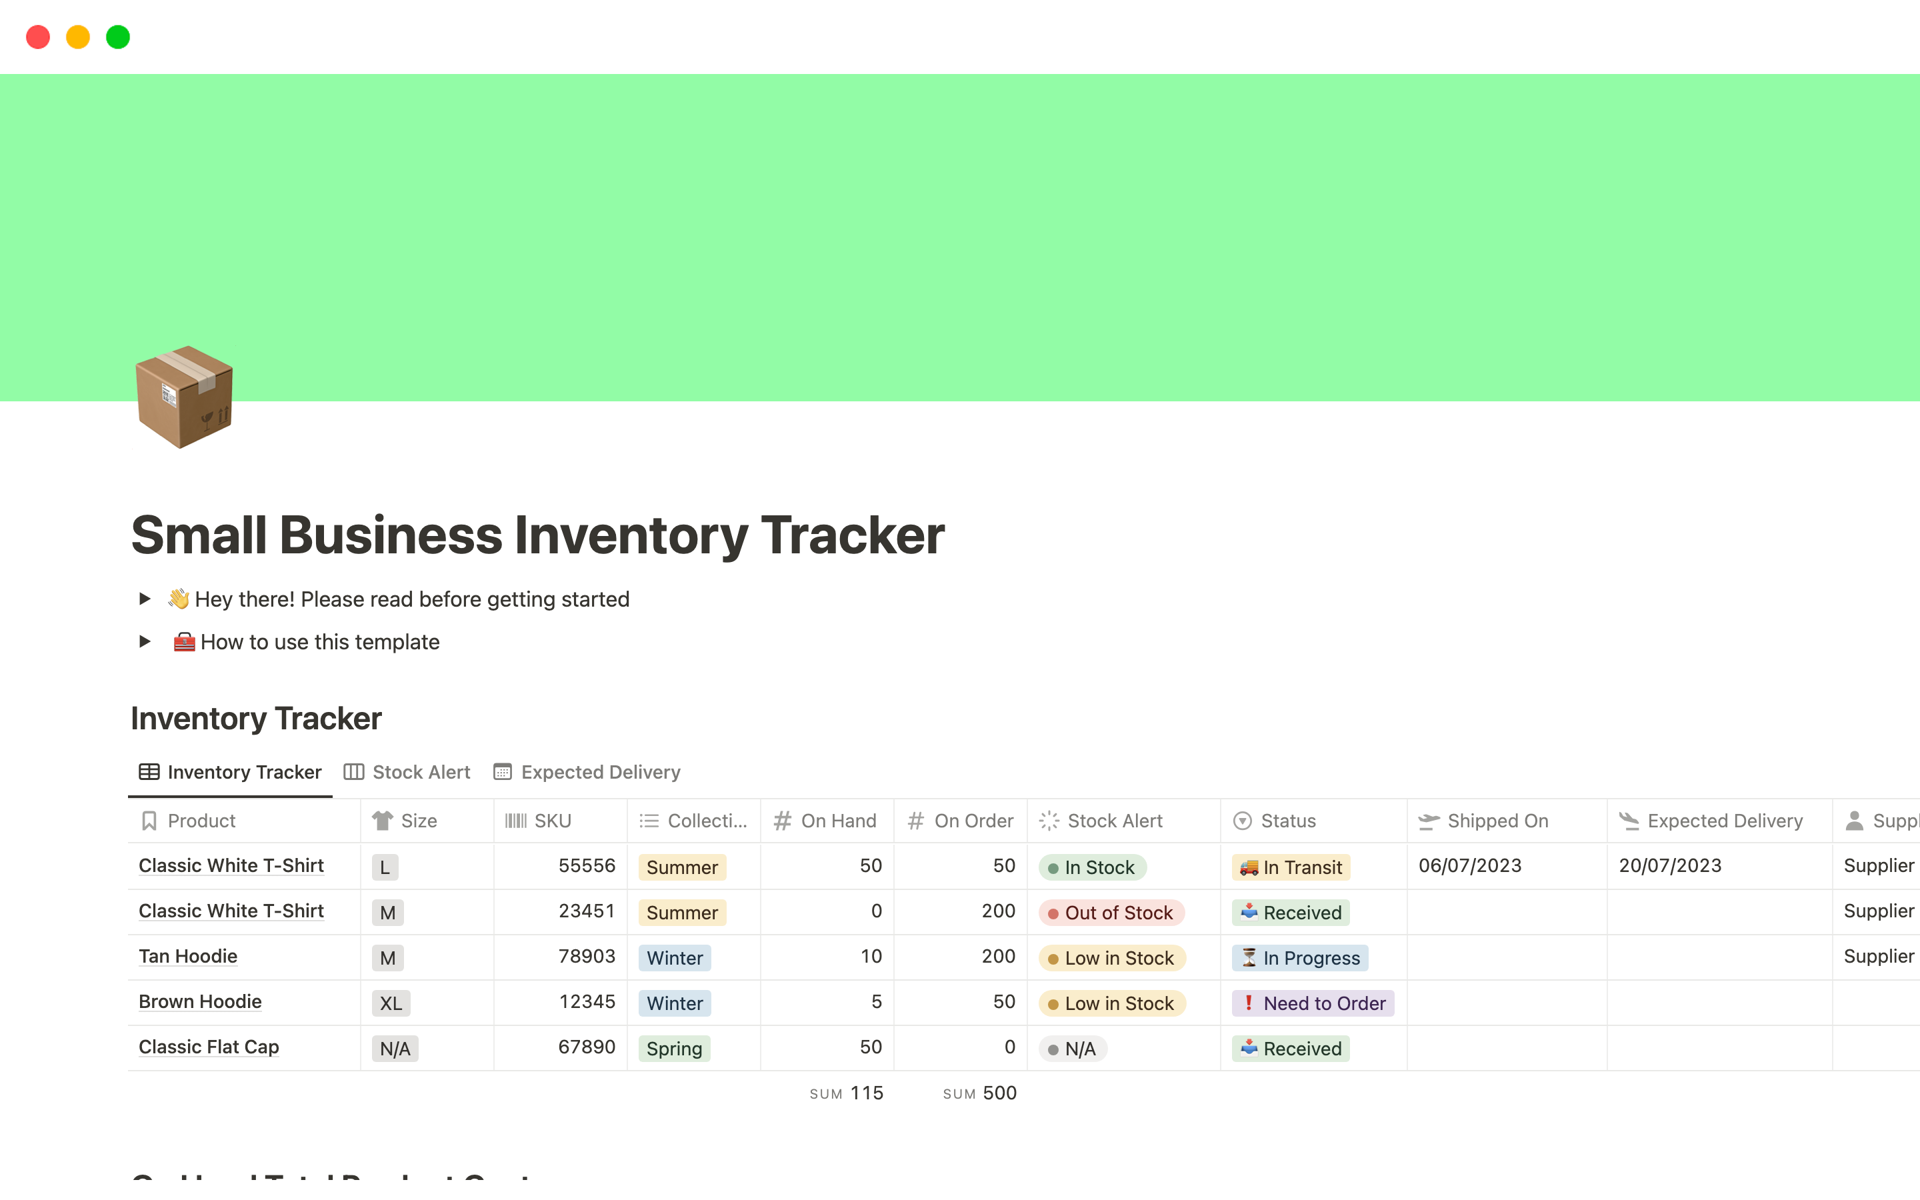 This template allows small business owners to track, order, and manage their inventory in one place.